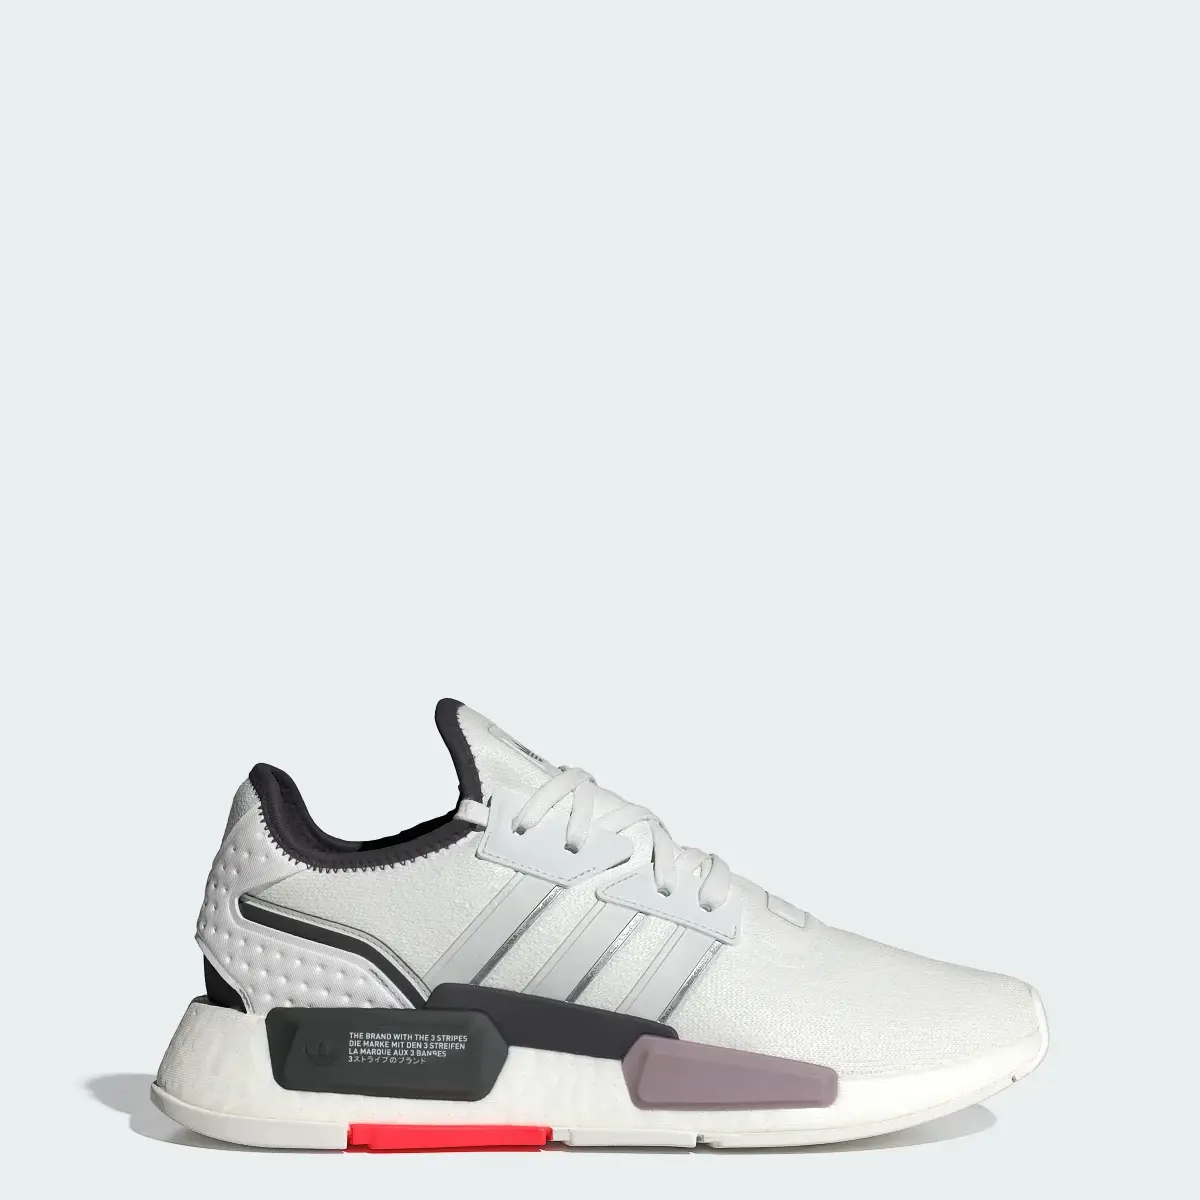 Adidas NMD_G1 Shoes. 1